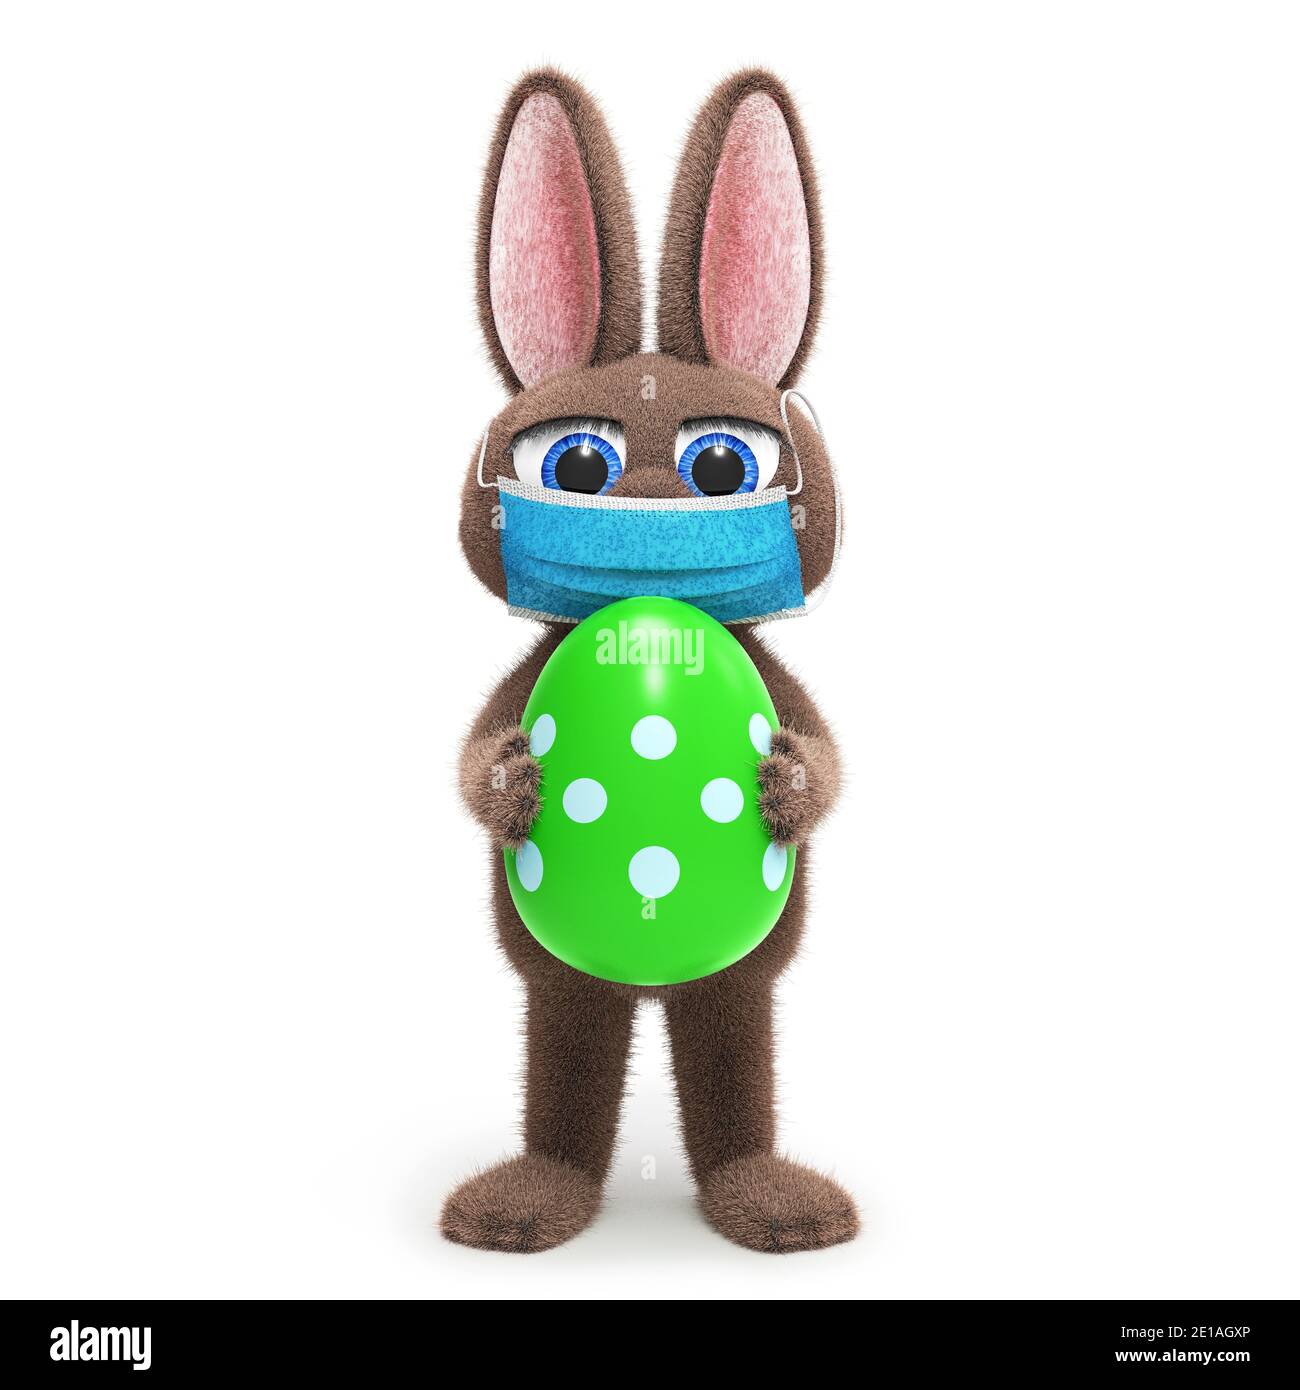 Cute easter bunny holding a colored egg decorated with ornaments and surgical masks to prevent corona COVID-19 infection, isolated on white background Stock Photo